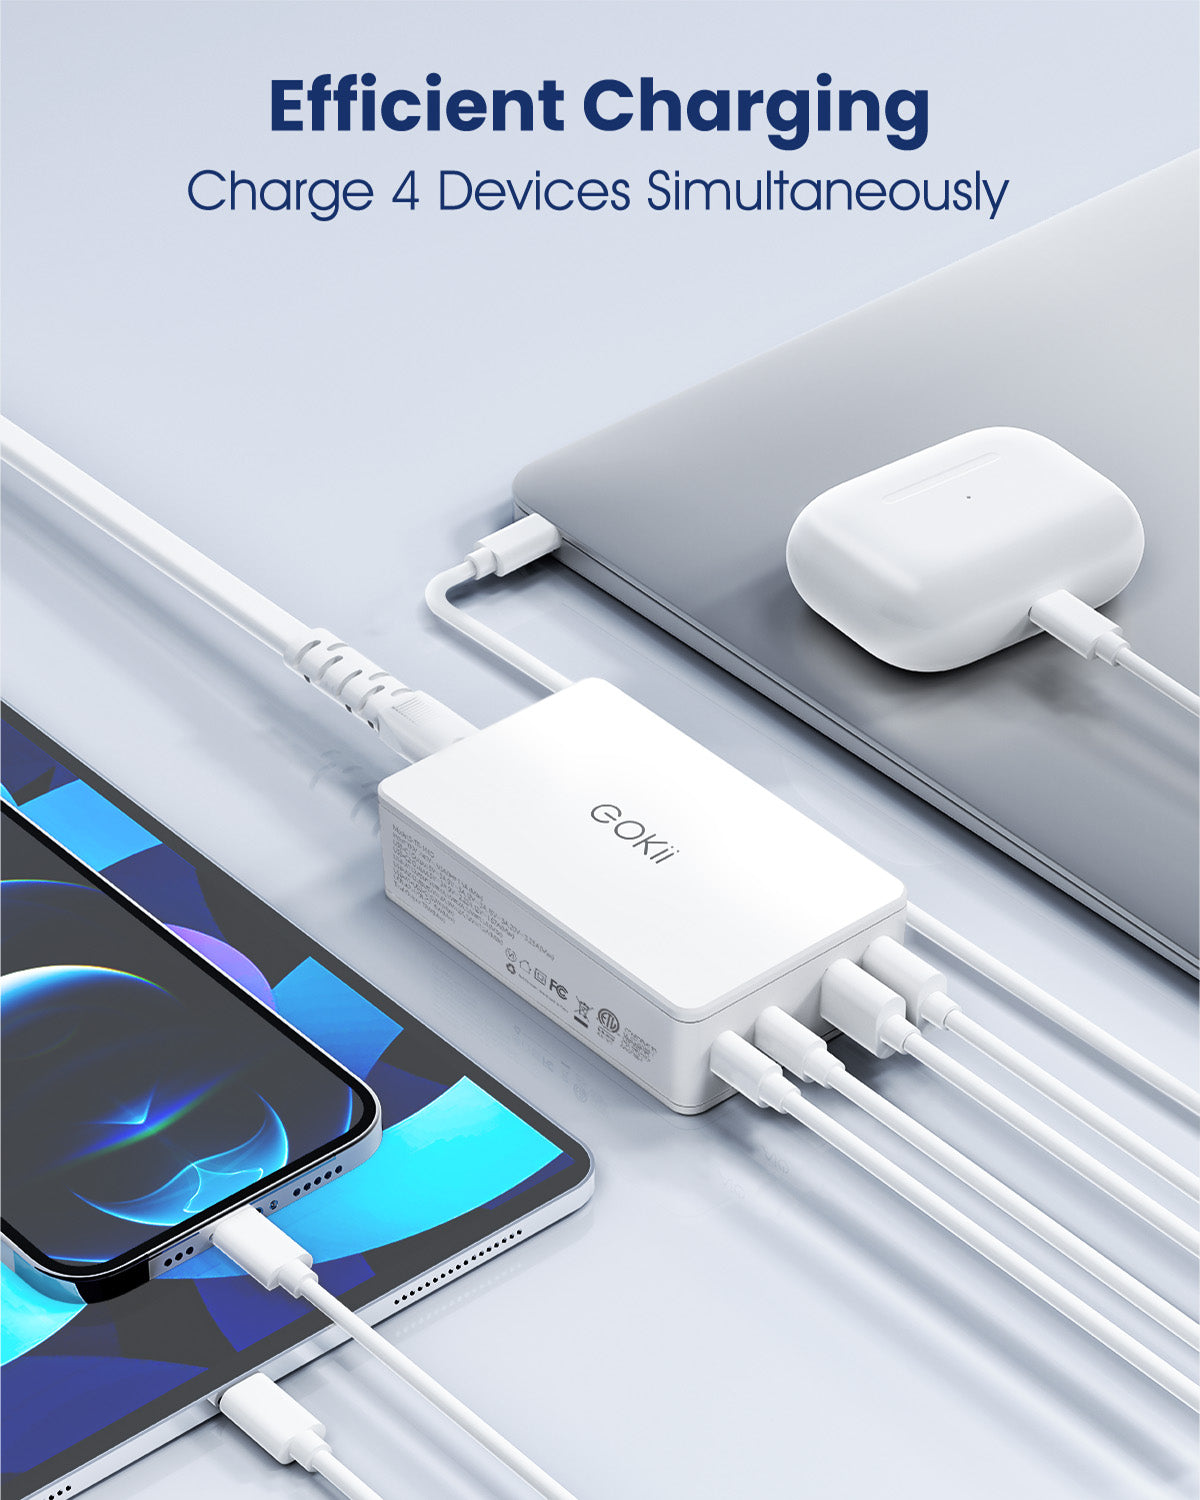 2-Pack Eokii 78W 4-Port PD Fast USB C Wall Charger